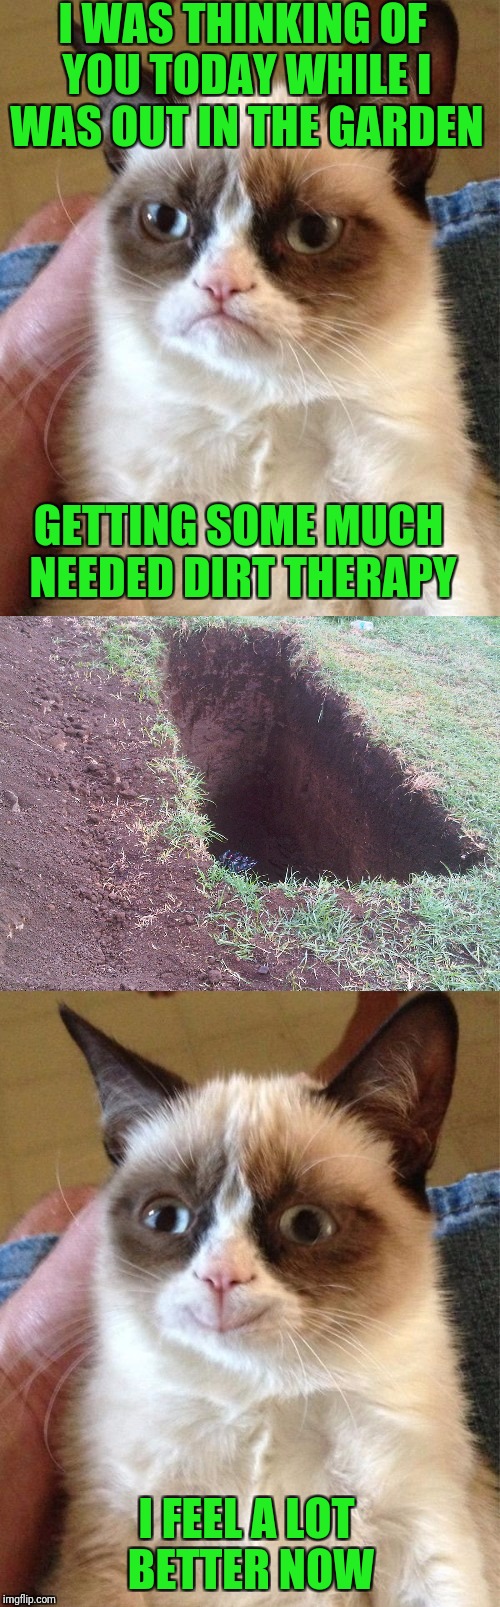 Gardening... It's Cheaper Than Therapy | I WAS THINKING OF YOU TODAY WHILE I WAS OUT IN THE GARDEN; GETTING SOME MUCH NEEDED DIRT THERAPY; I FEEL A LOT BETTER NOW | image tagged in grumpy cat,memes,gardening,dirt therapy | made w/ Imgflip meme maker